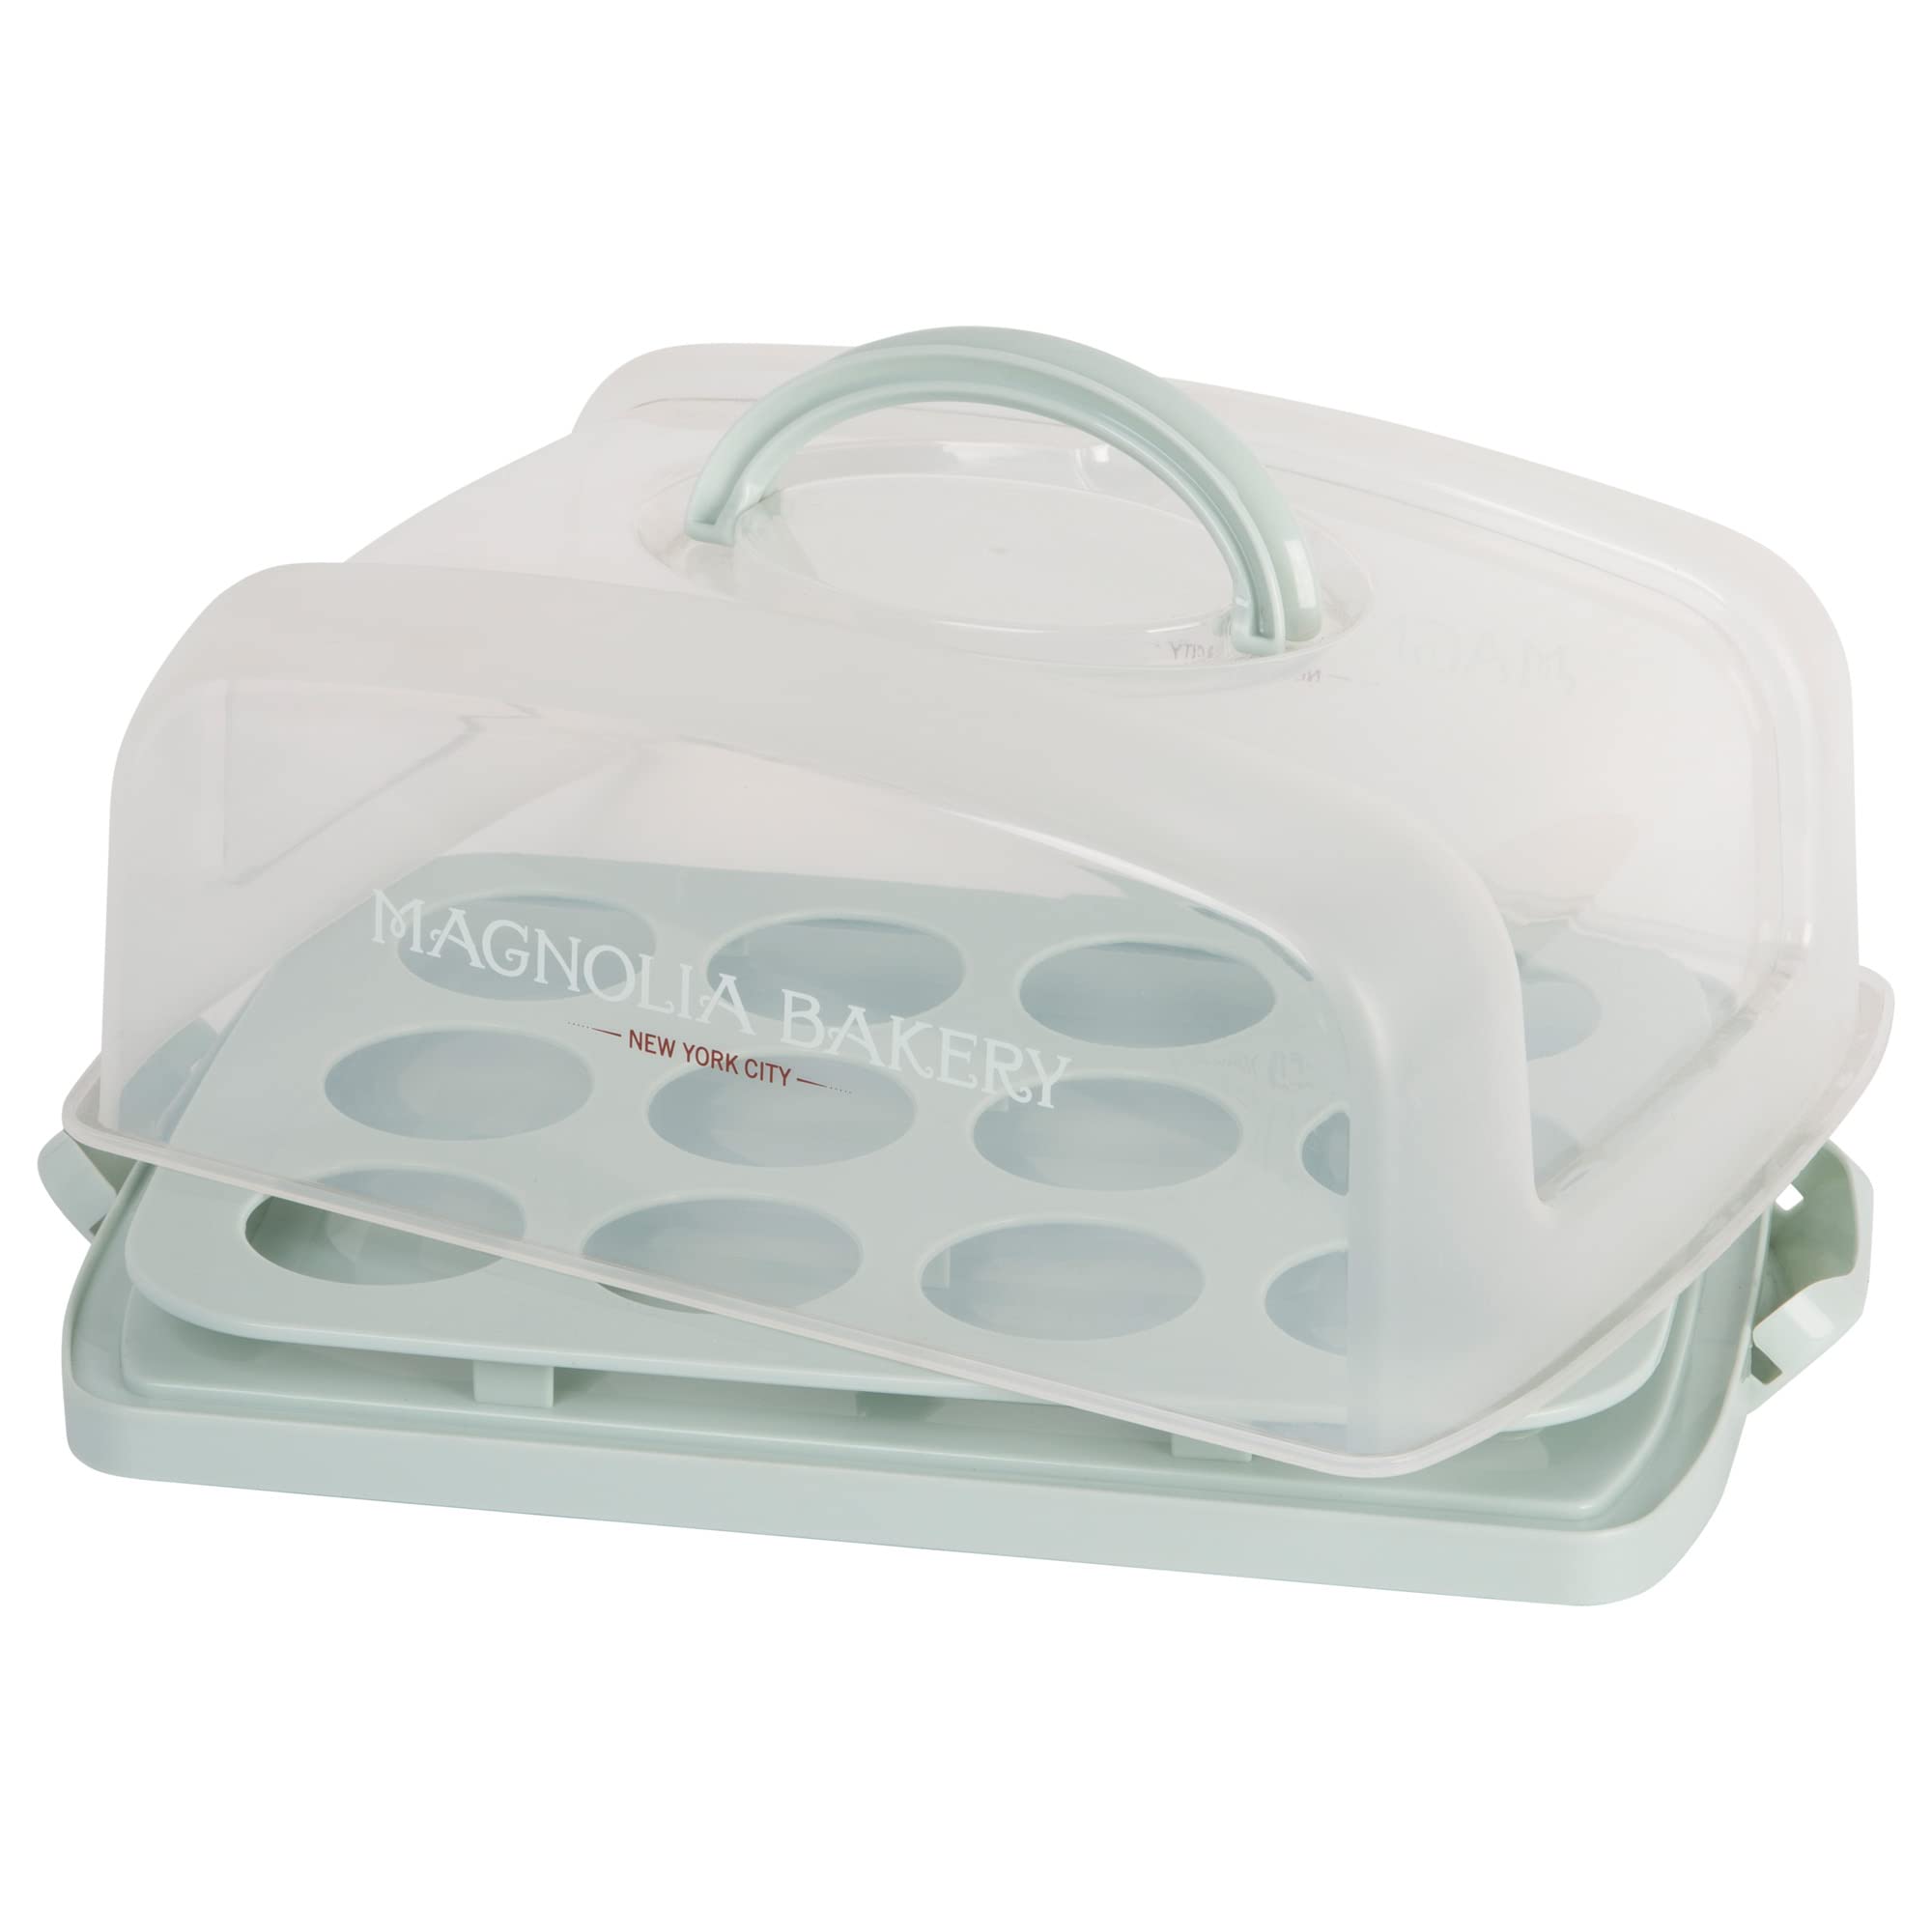 Magnolia 2in1 Cupcake Carrier and Cake Keeper with Lid, Cupcake Box to Fit 12, Sturdy, BPA-Free Cupcake Holder with Two Secure Side Closures, Dishwasher Safe (564)  - Like New